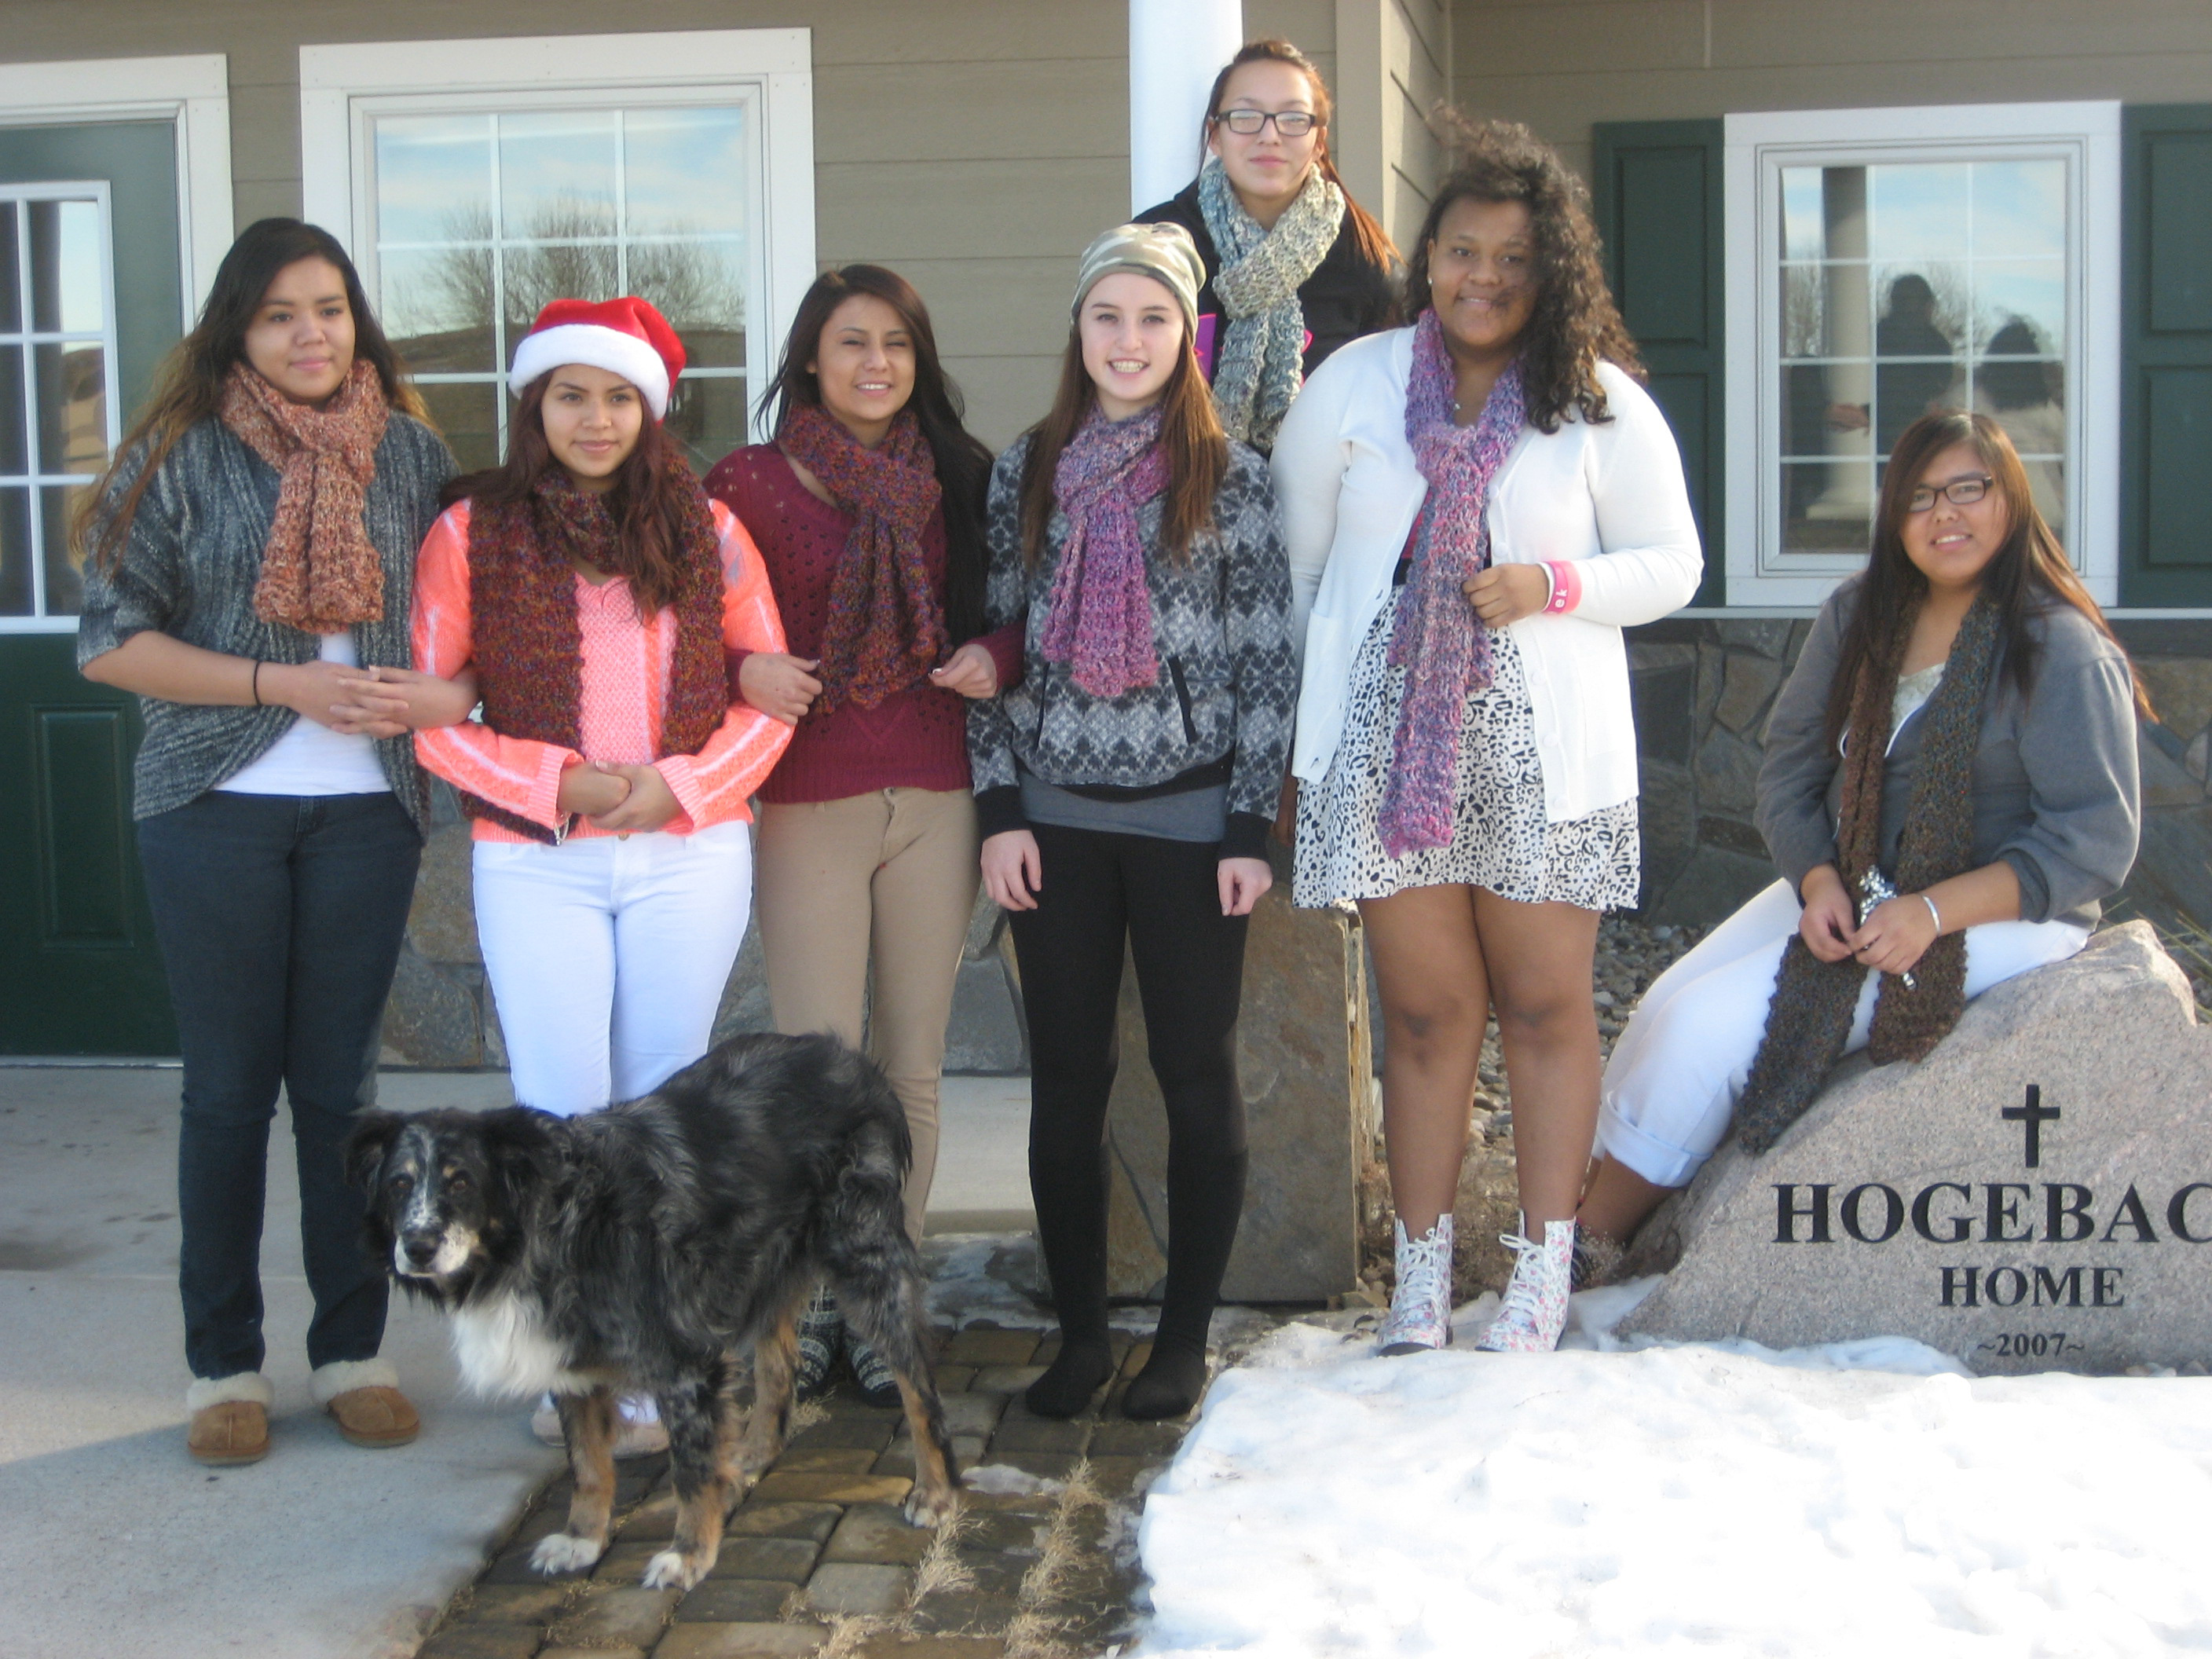 There are two freshmen and six upperclassmen in St. Joseph’s Hogebach Home.